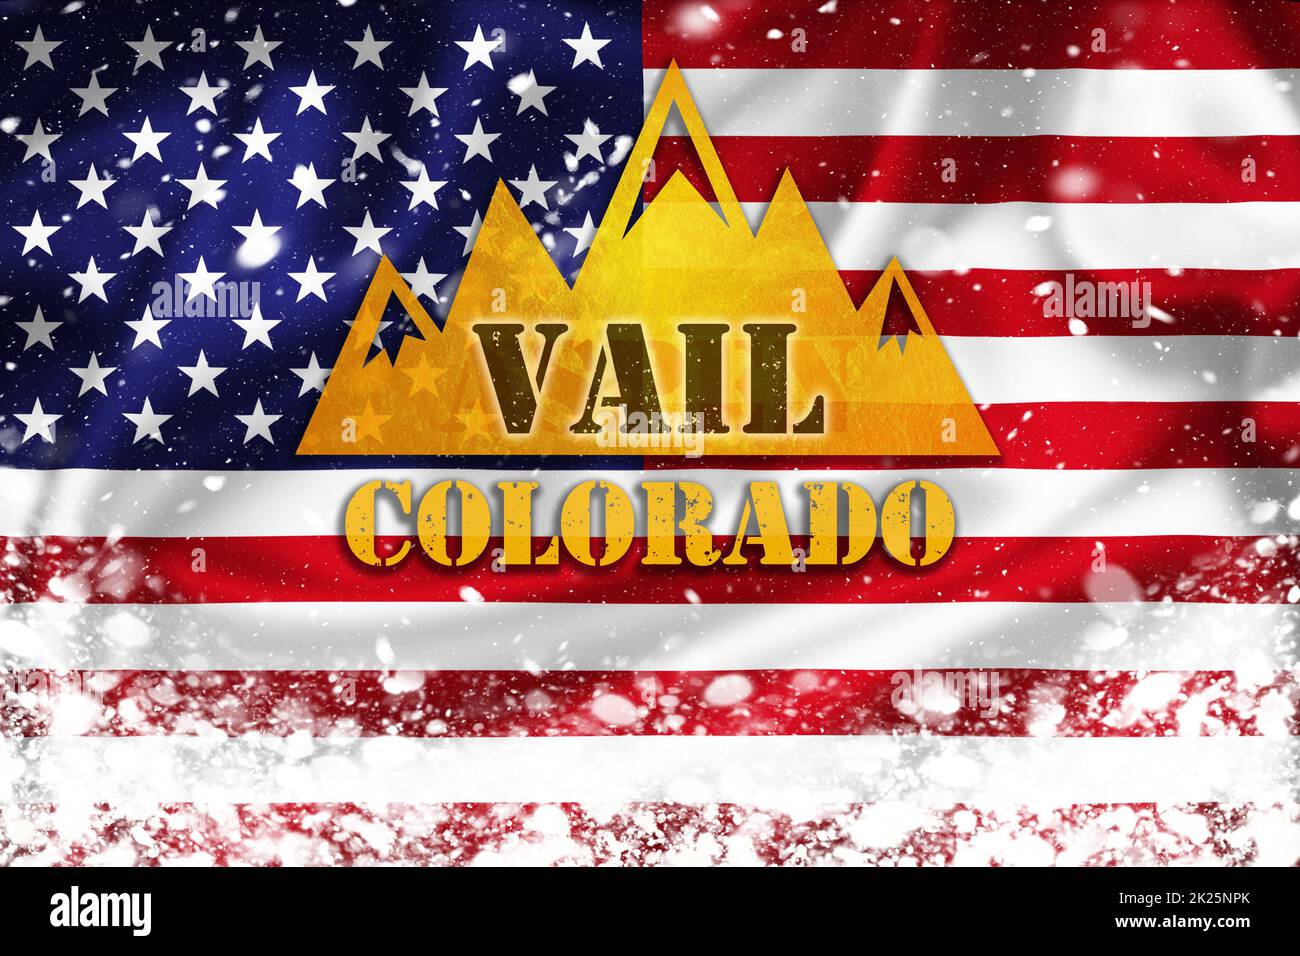 Vail Colorado banner illustration on US flag and snow layer Stock Photo